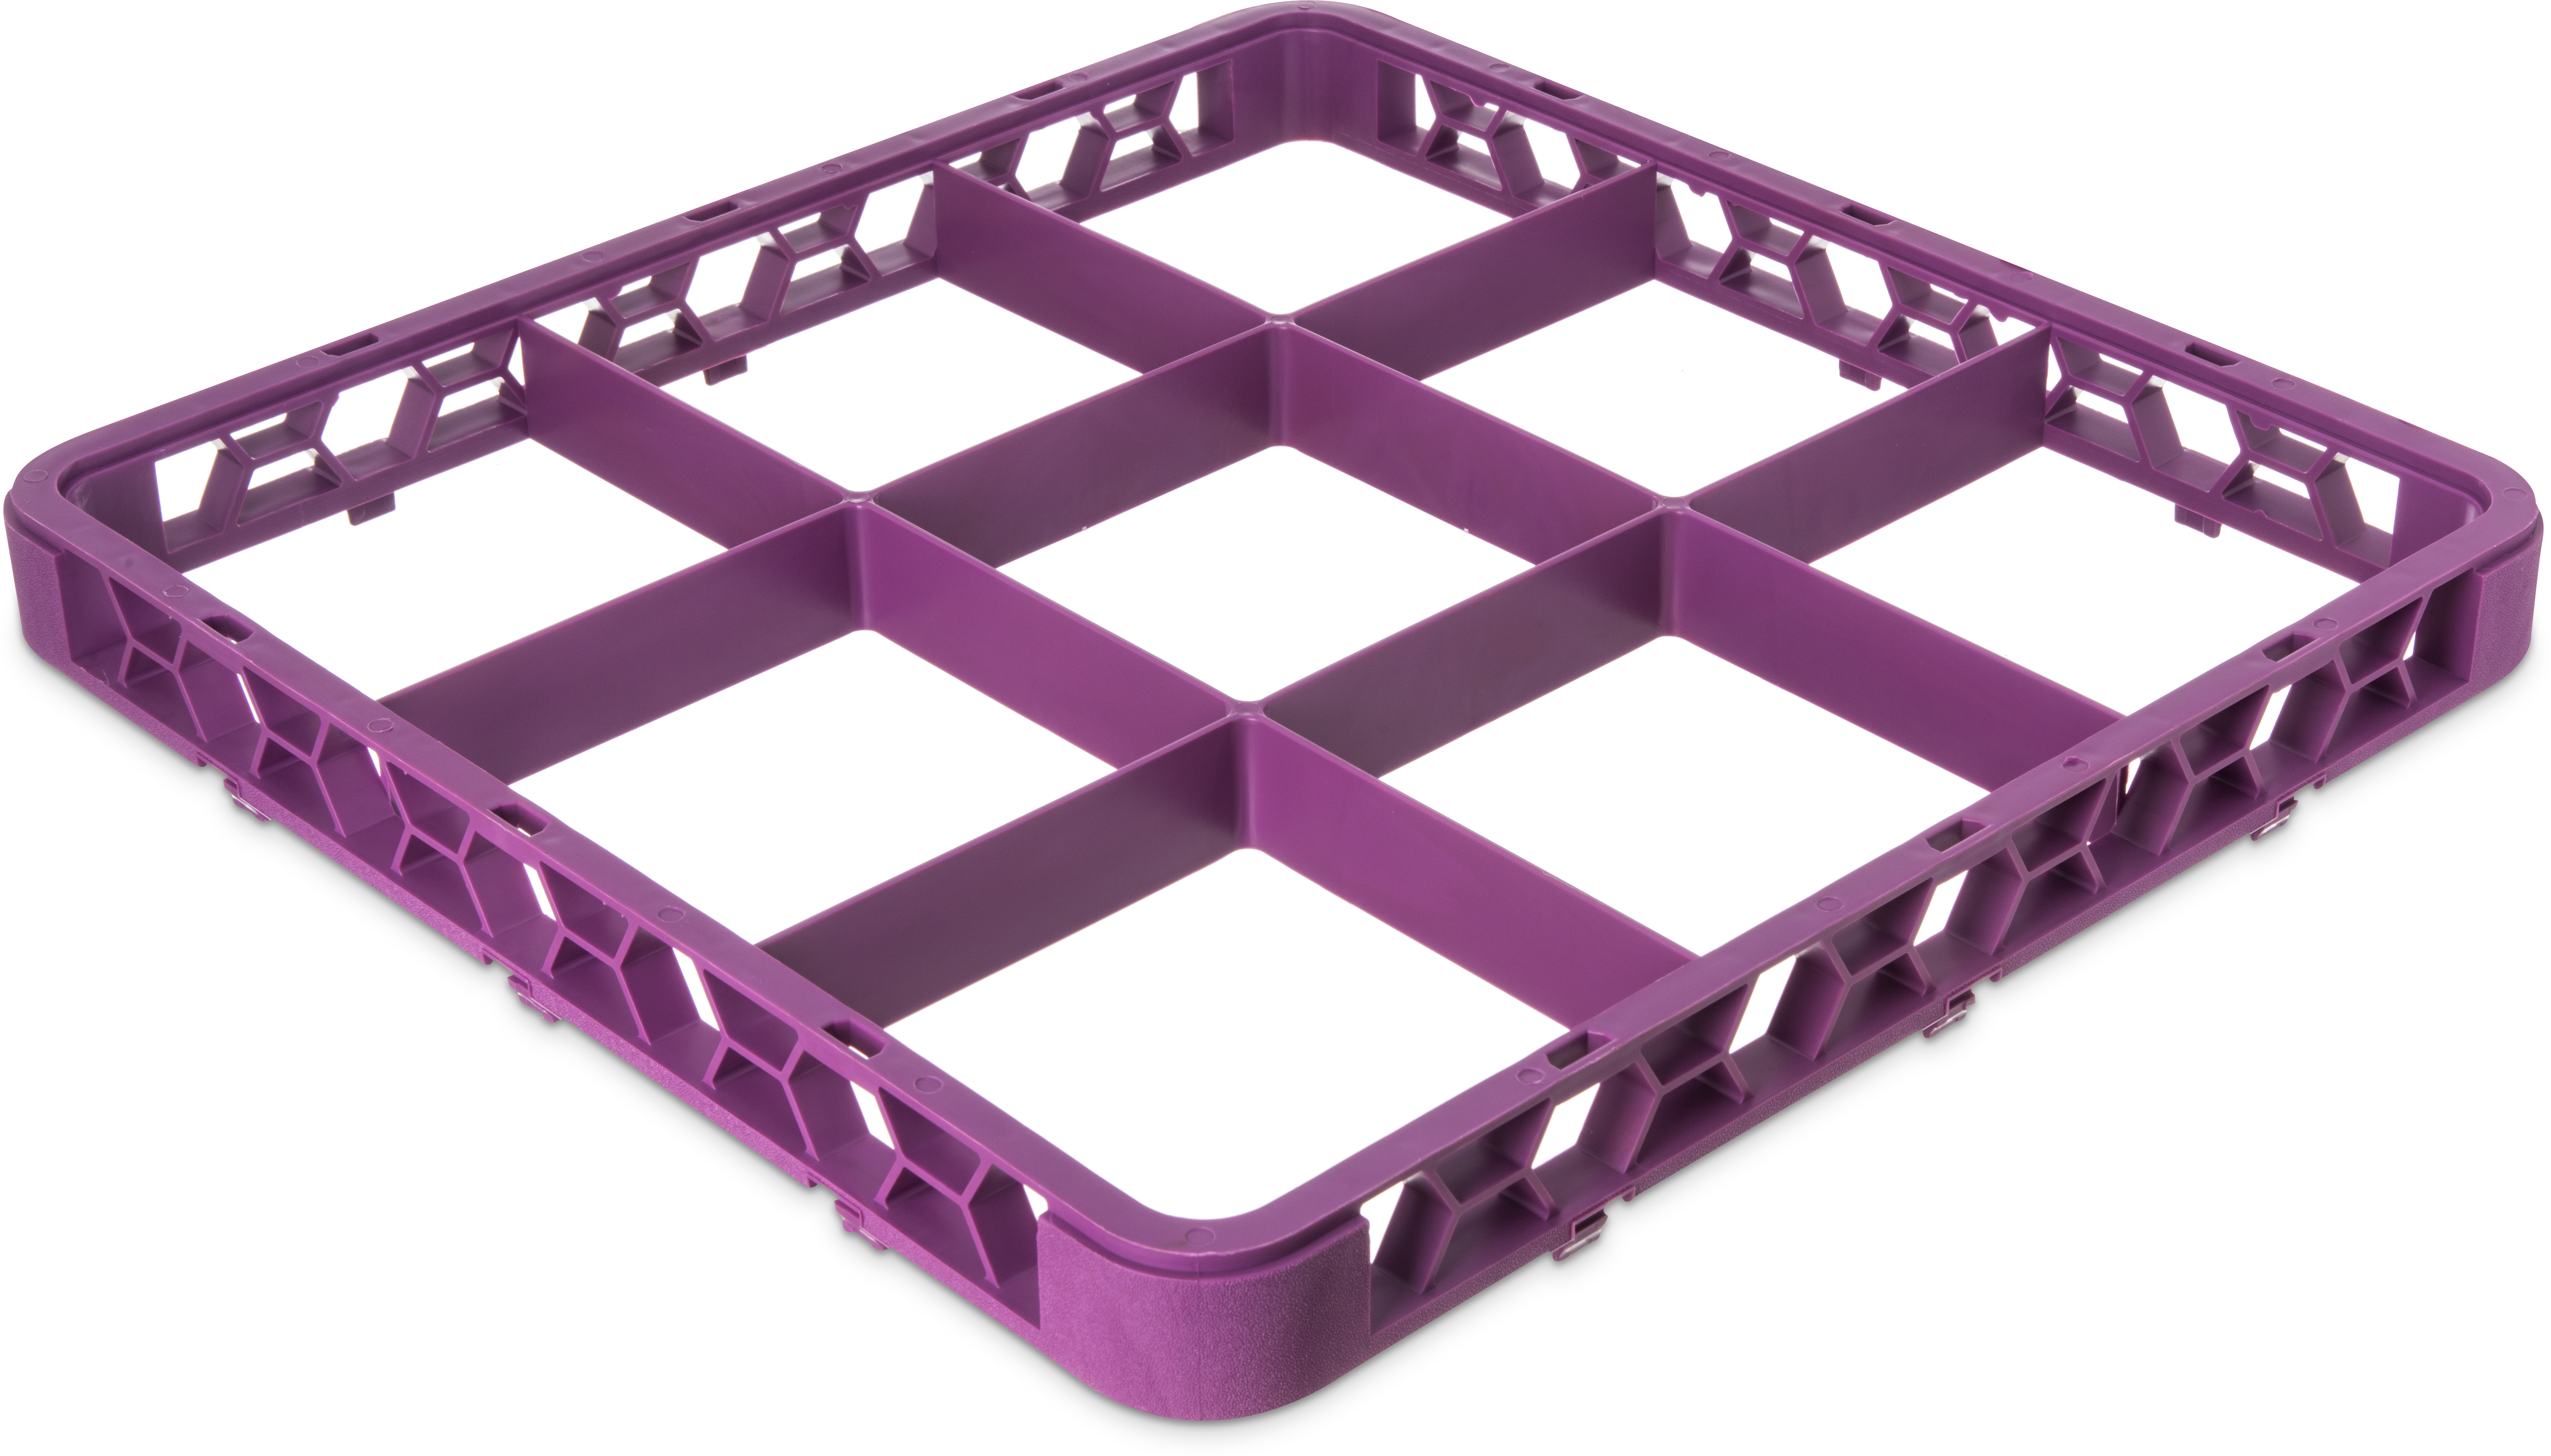 OptiClean 9 Compartment Divided Glass Rack Extender 1.78 - Lavender